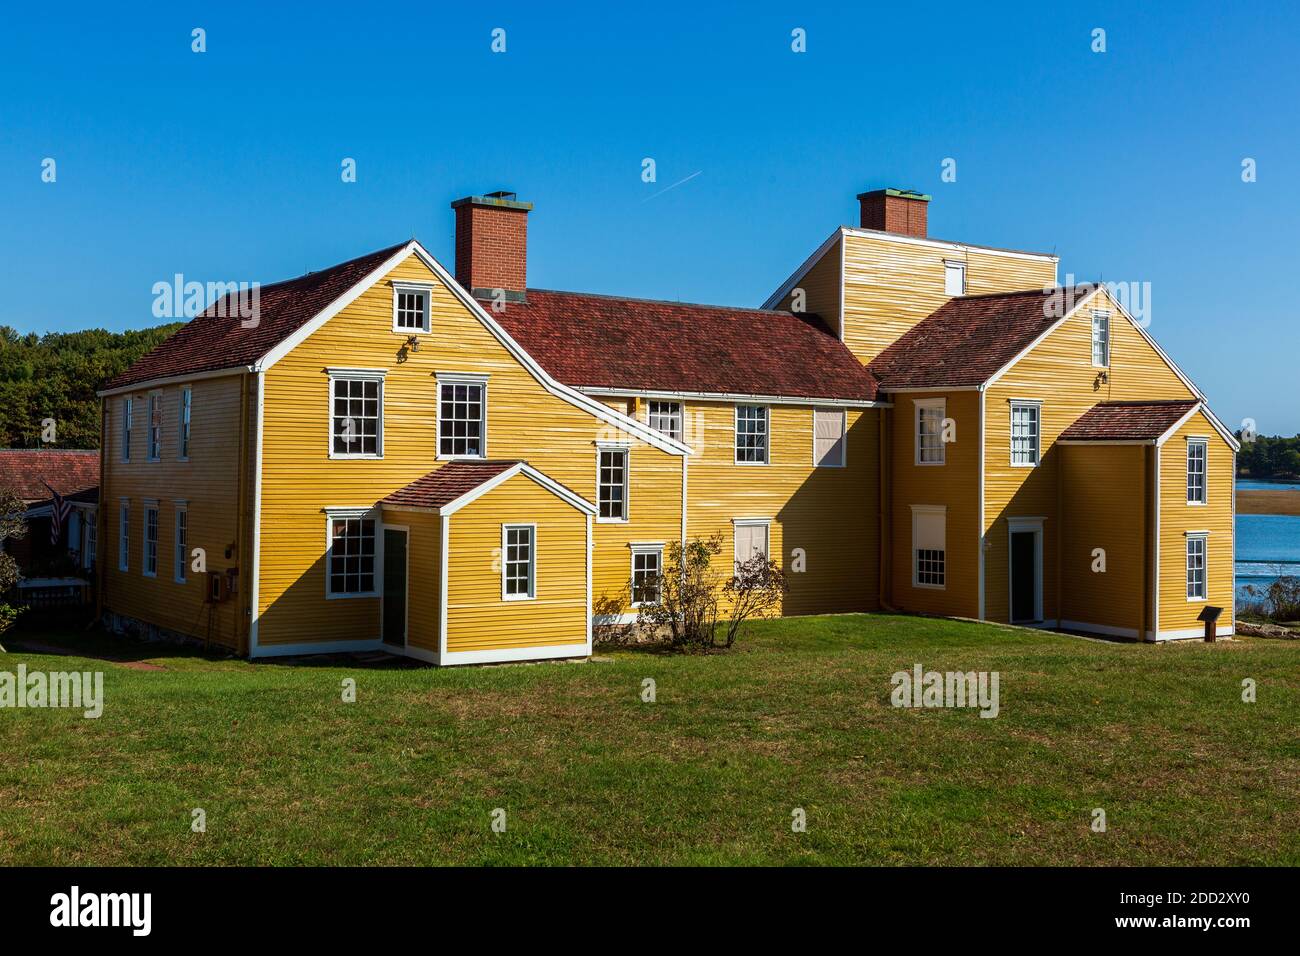 A view of the Wentworth Coolidge Mansion Portsmouth New Hampshire on a sunny, cloudless autumn day. It is a National Historic Landmark. Stock Photo